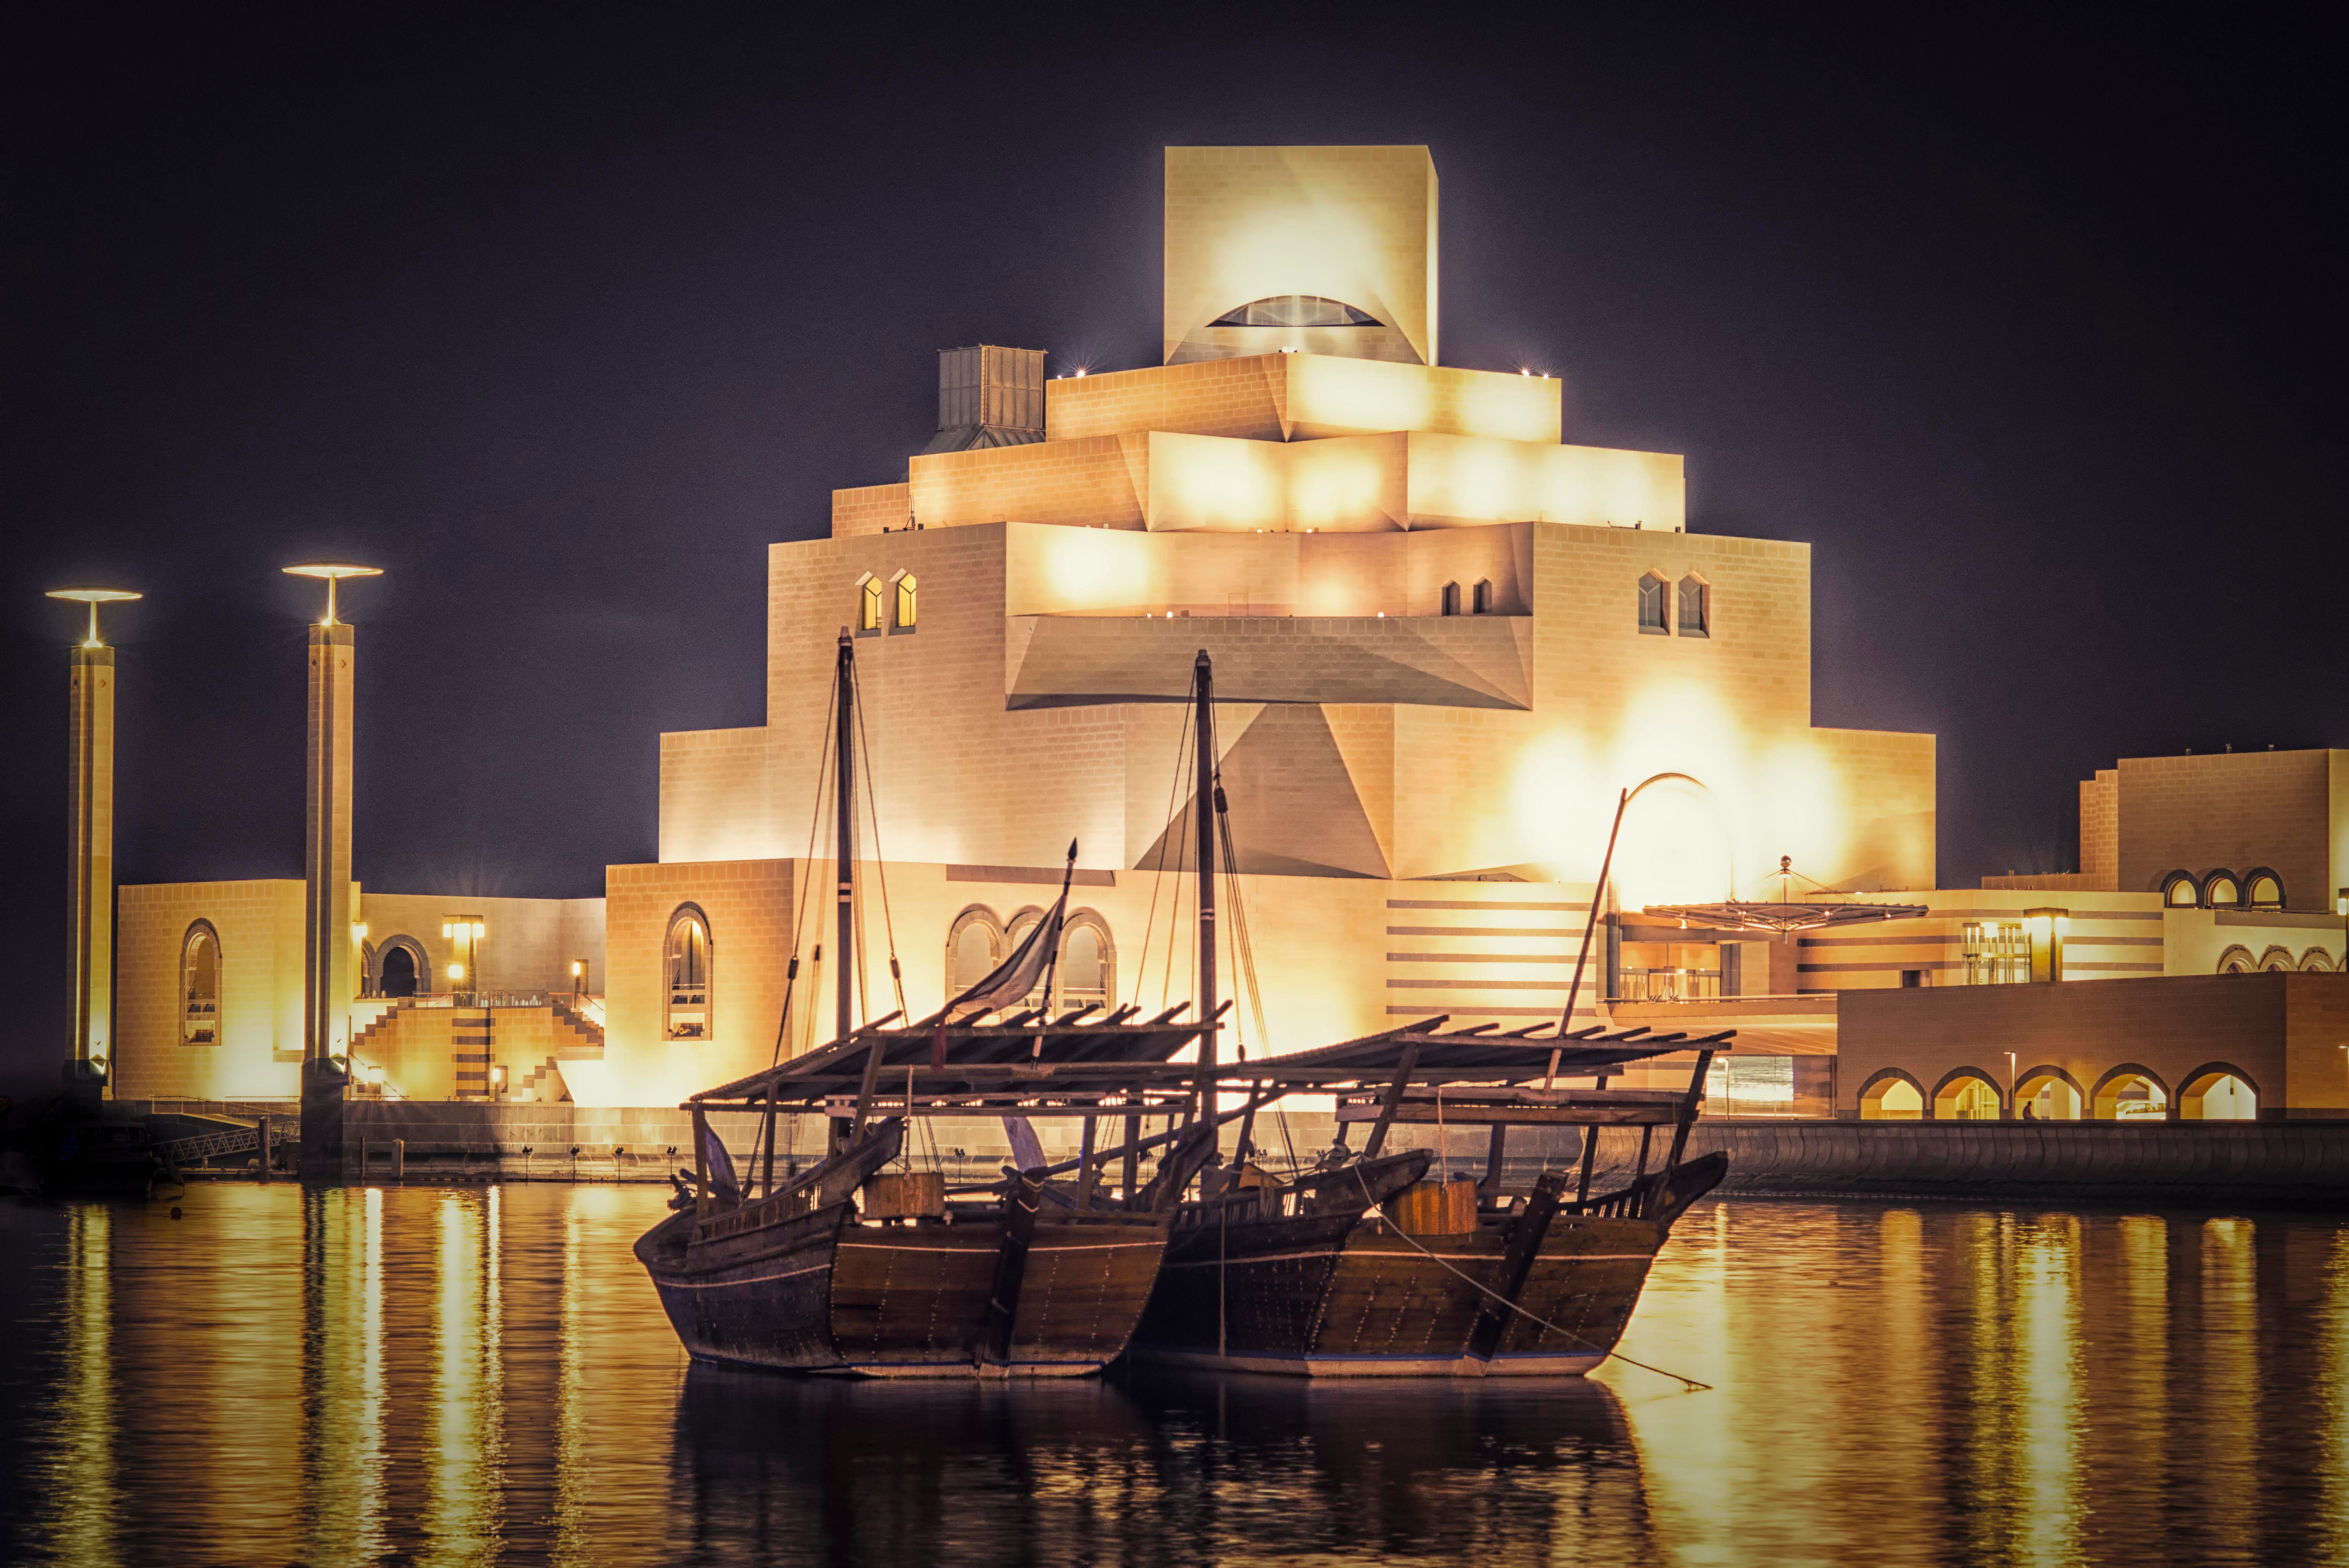 Museum of Islamic Art lit up at night with two traditional boats floating in calm water in front. Visit on our 2023 Doha Vacation Deals